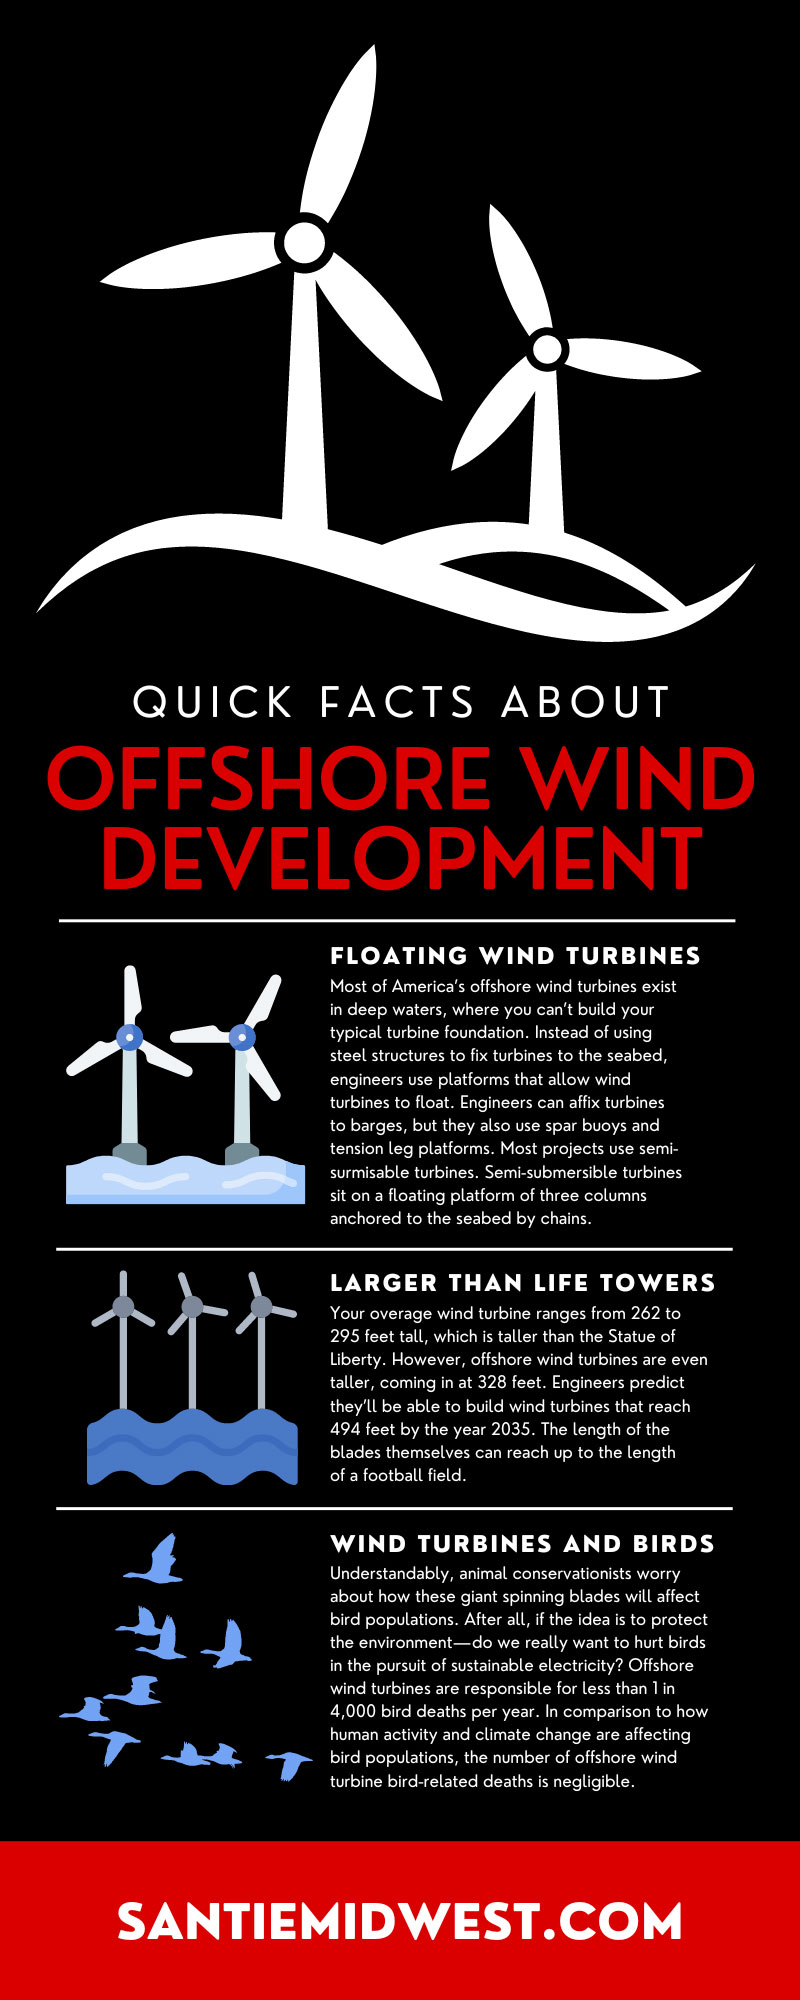 11 Quick Facts About Offshore Wind Development